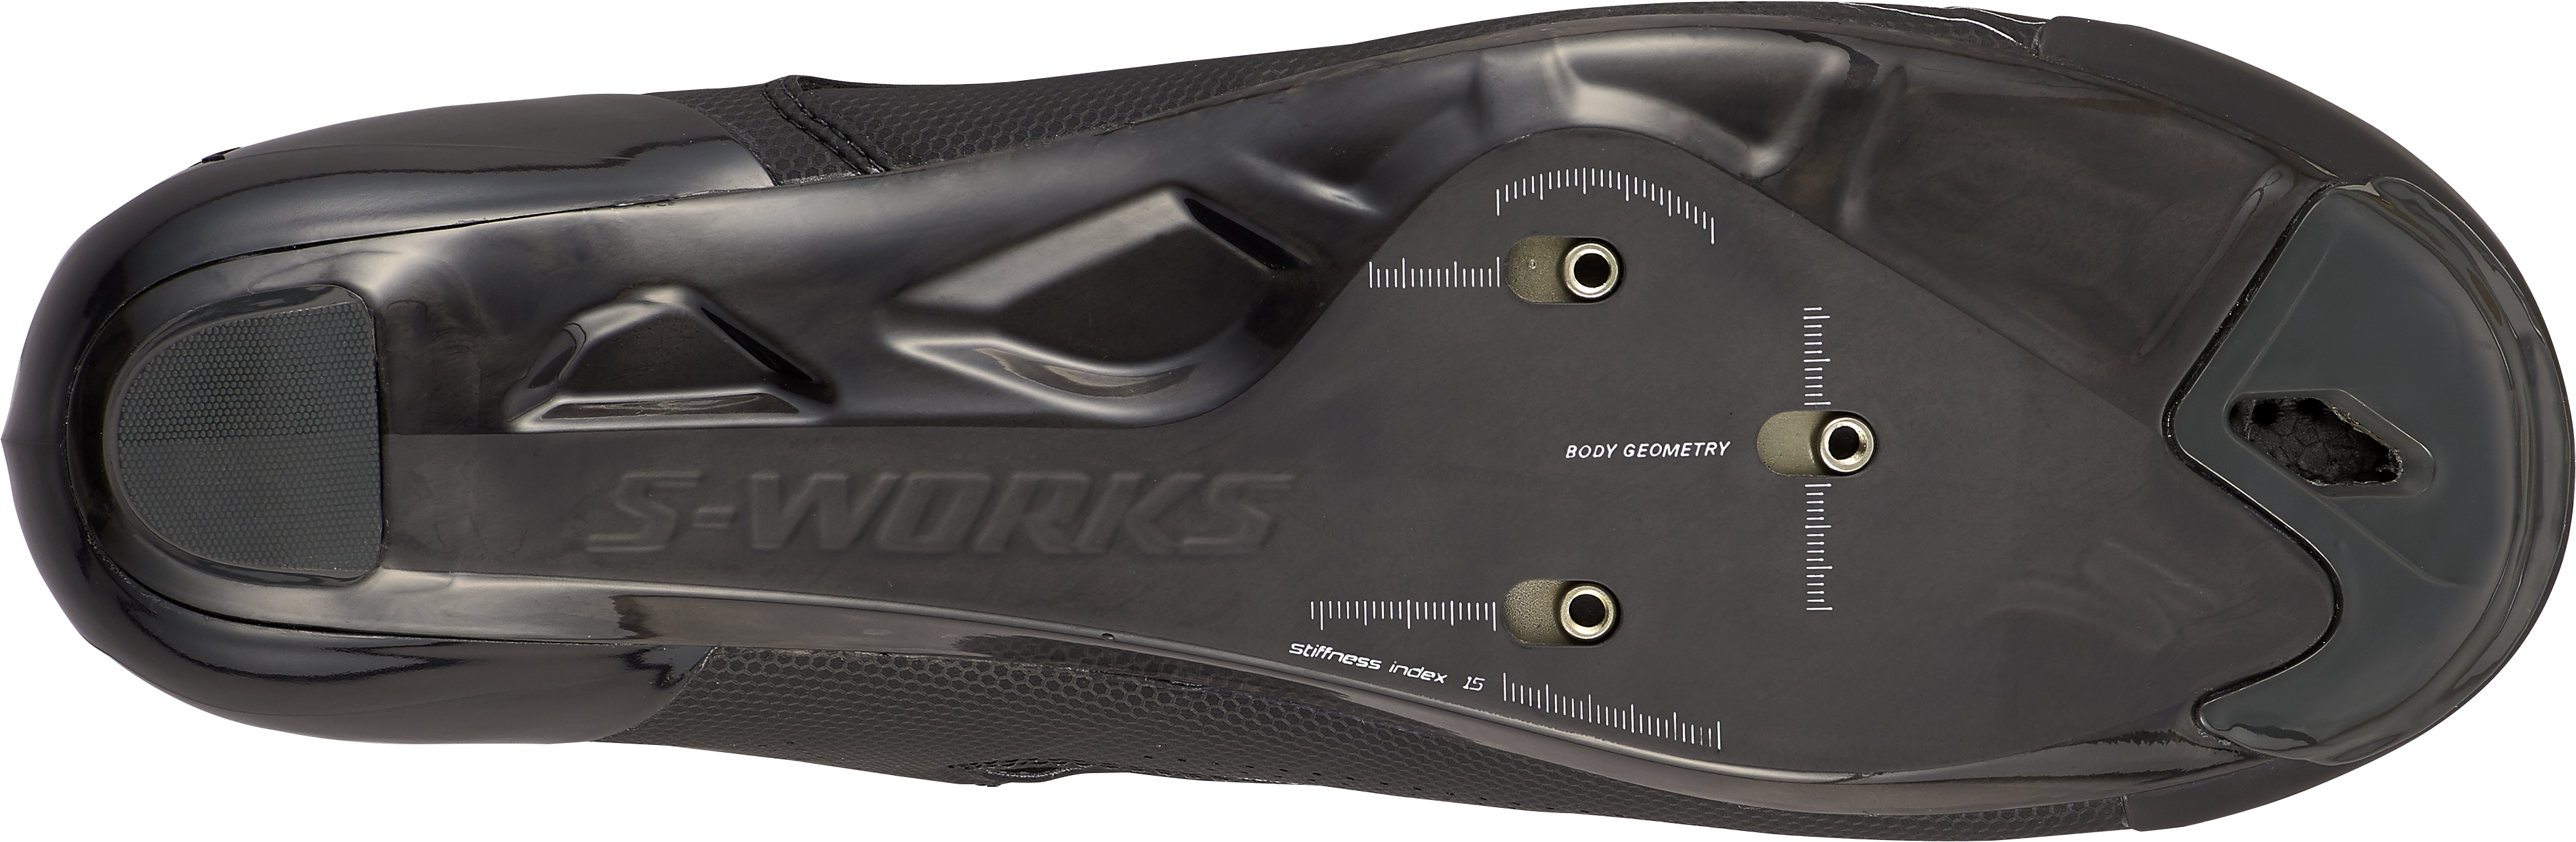 S-WORKS ARES ROAD SHOES BLK 39(39 (25cm) ブラック): シューズ 